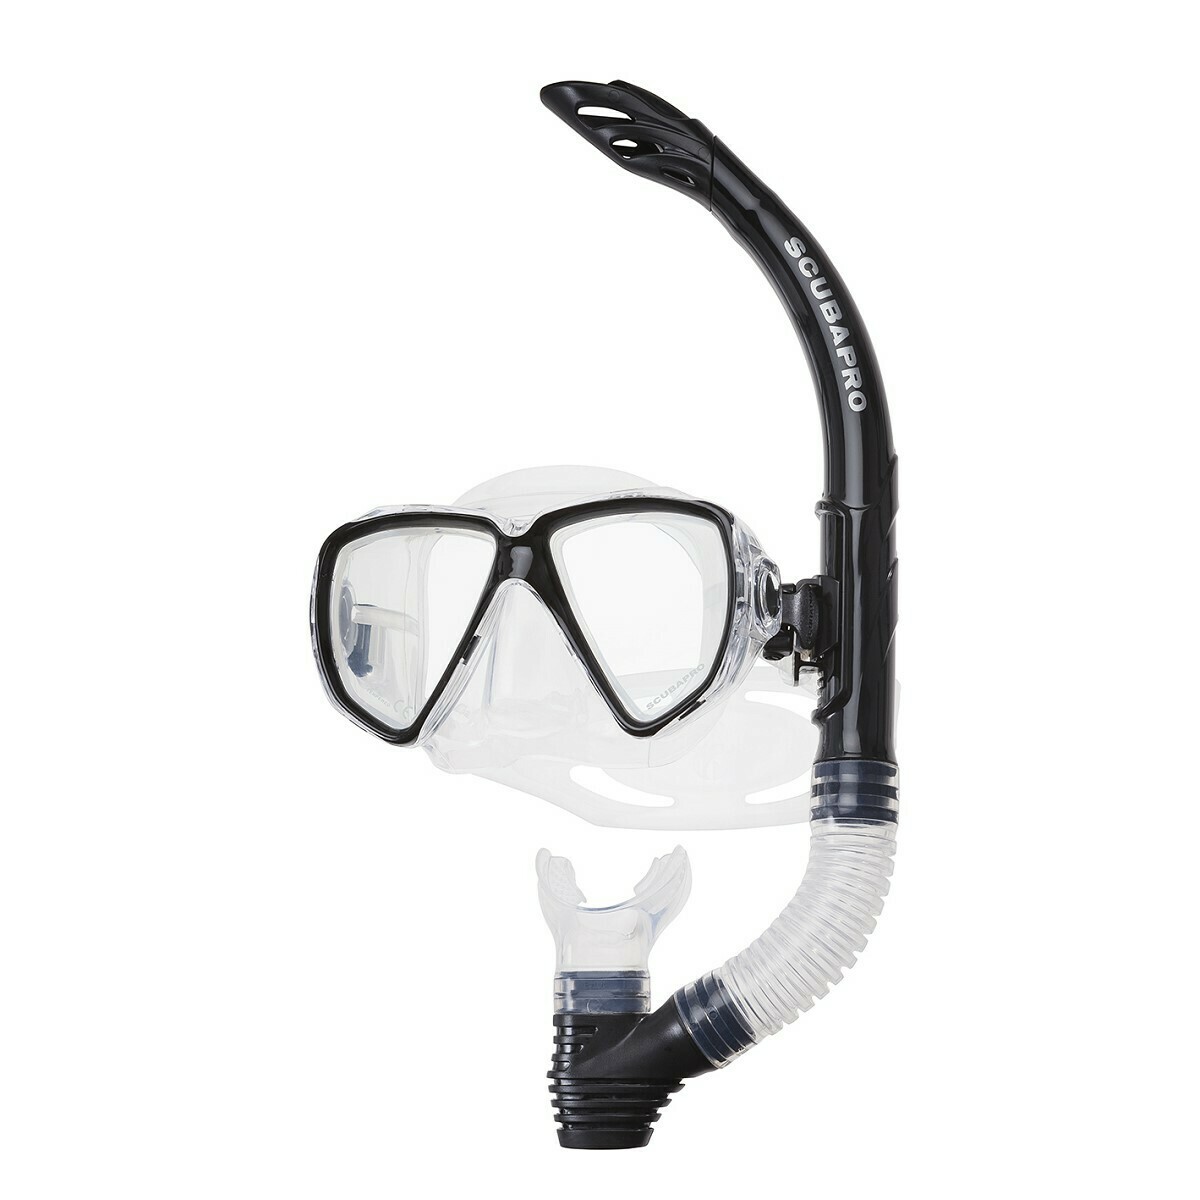 Currents Combo Mask and Snorkel